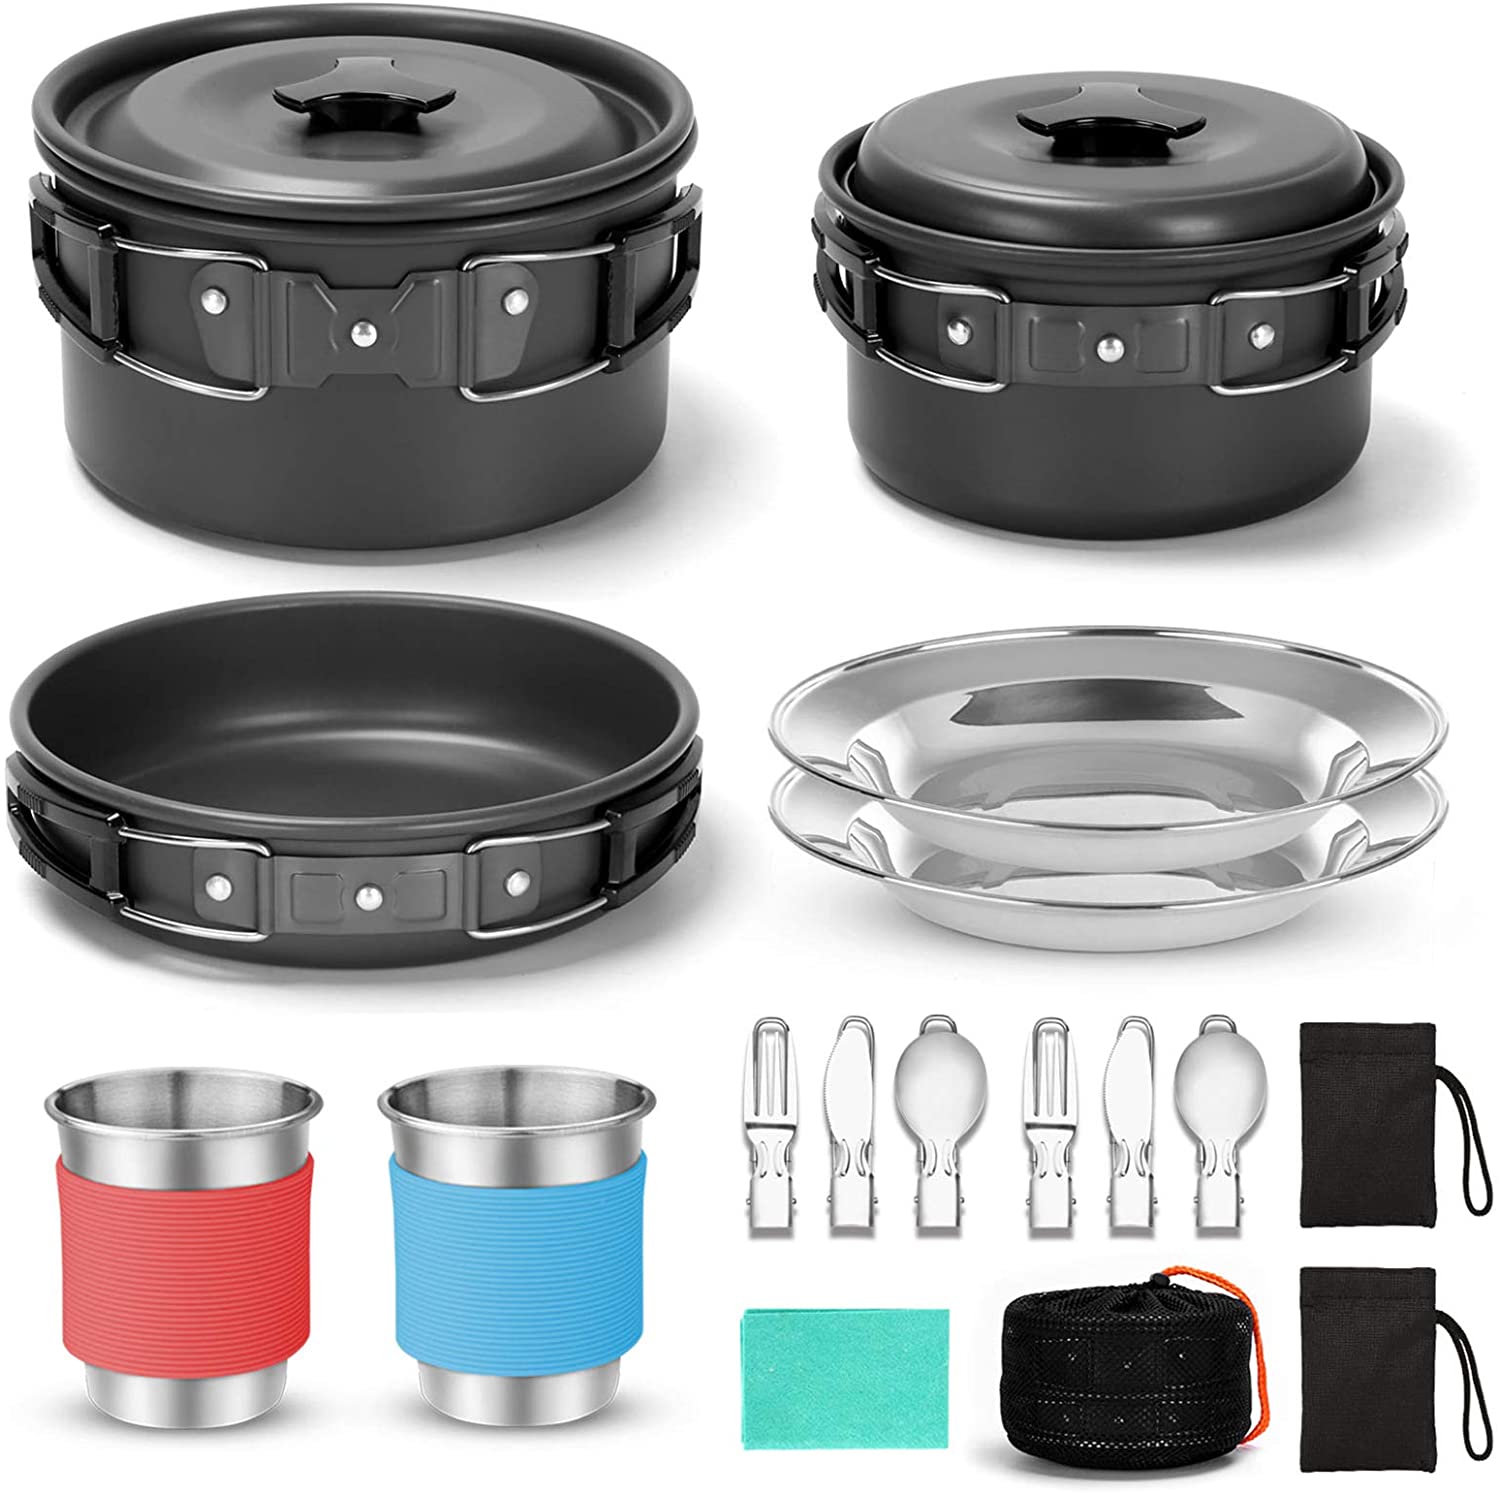 10. Odoland Camping Cookware Kit